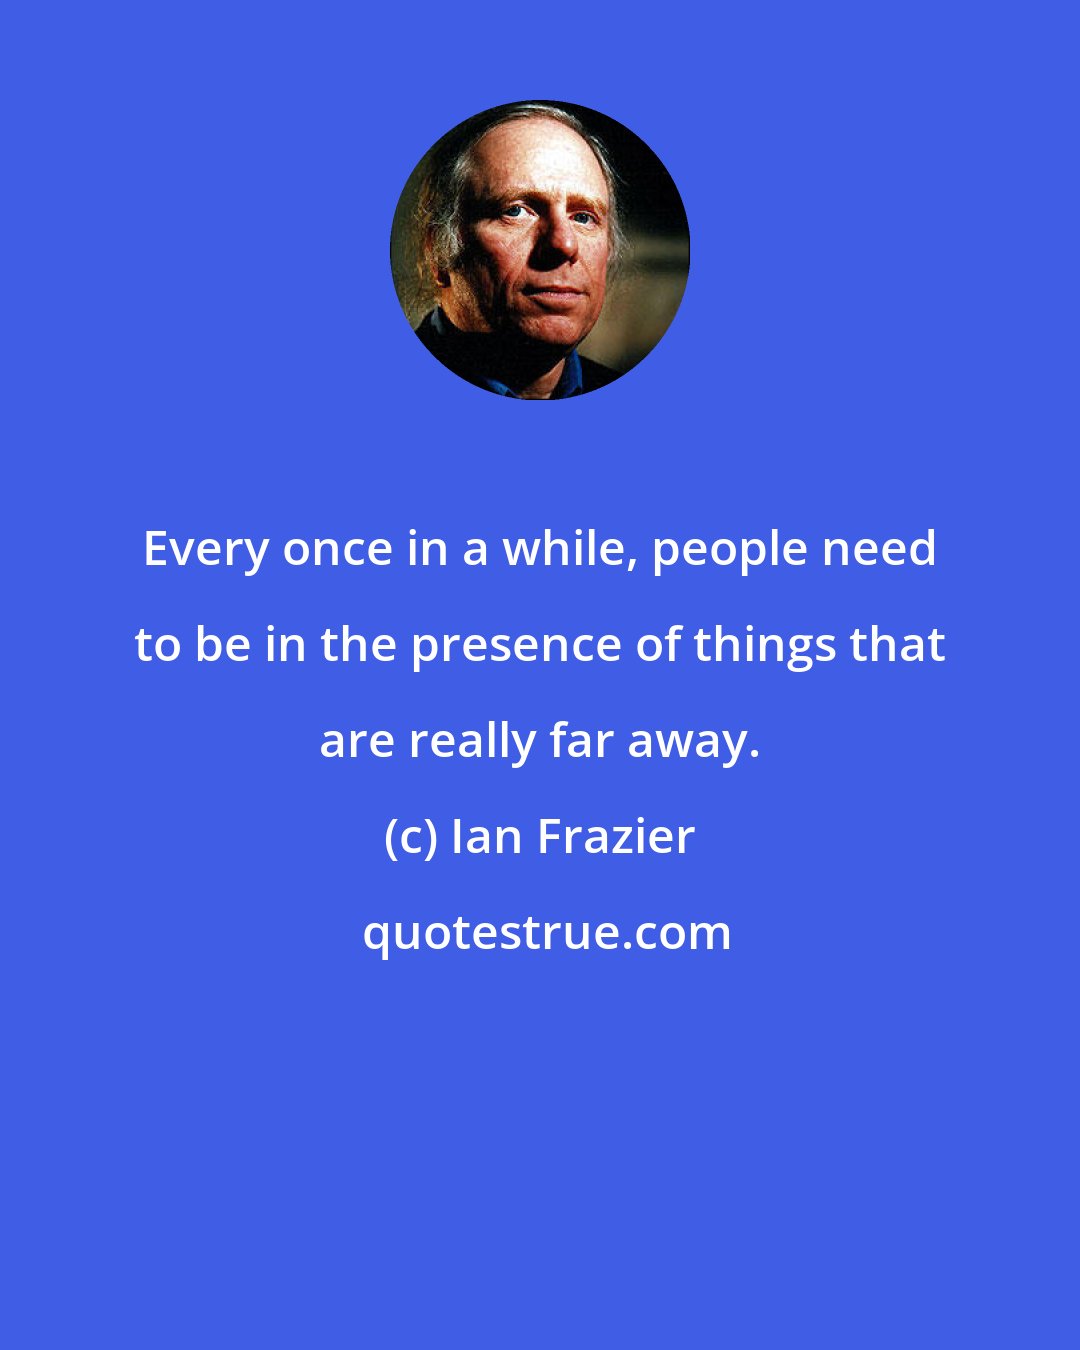 Ian Frazier: Every once in a while, people need to be in the presence of things that are really far away.